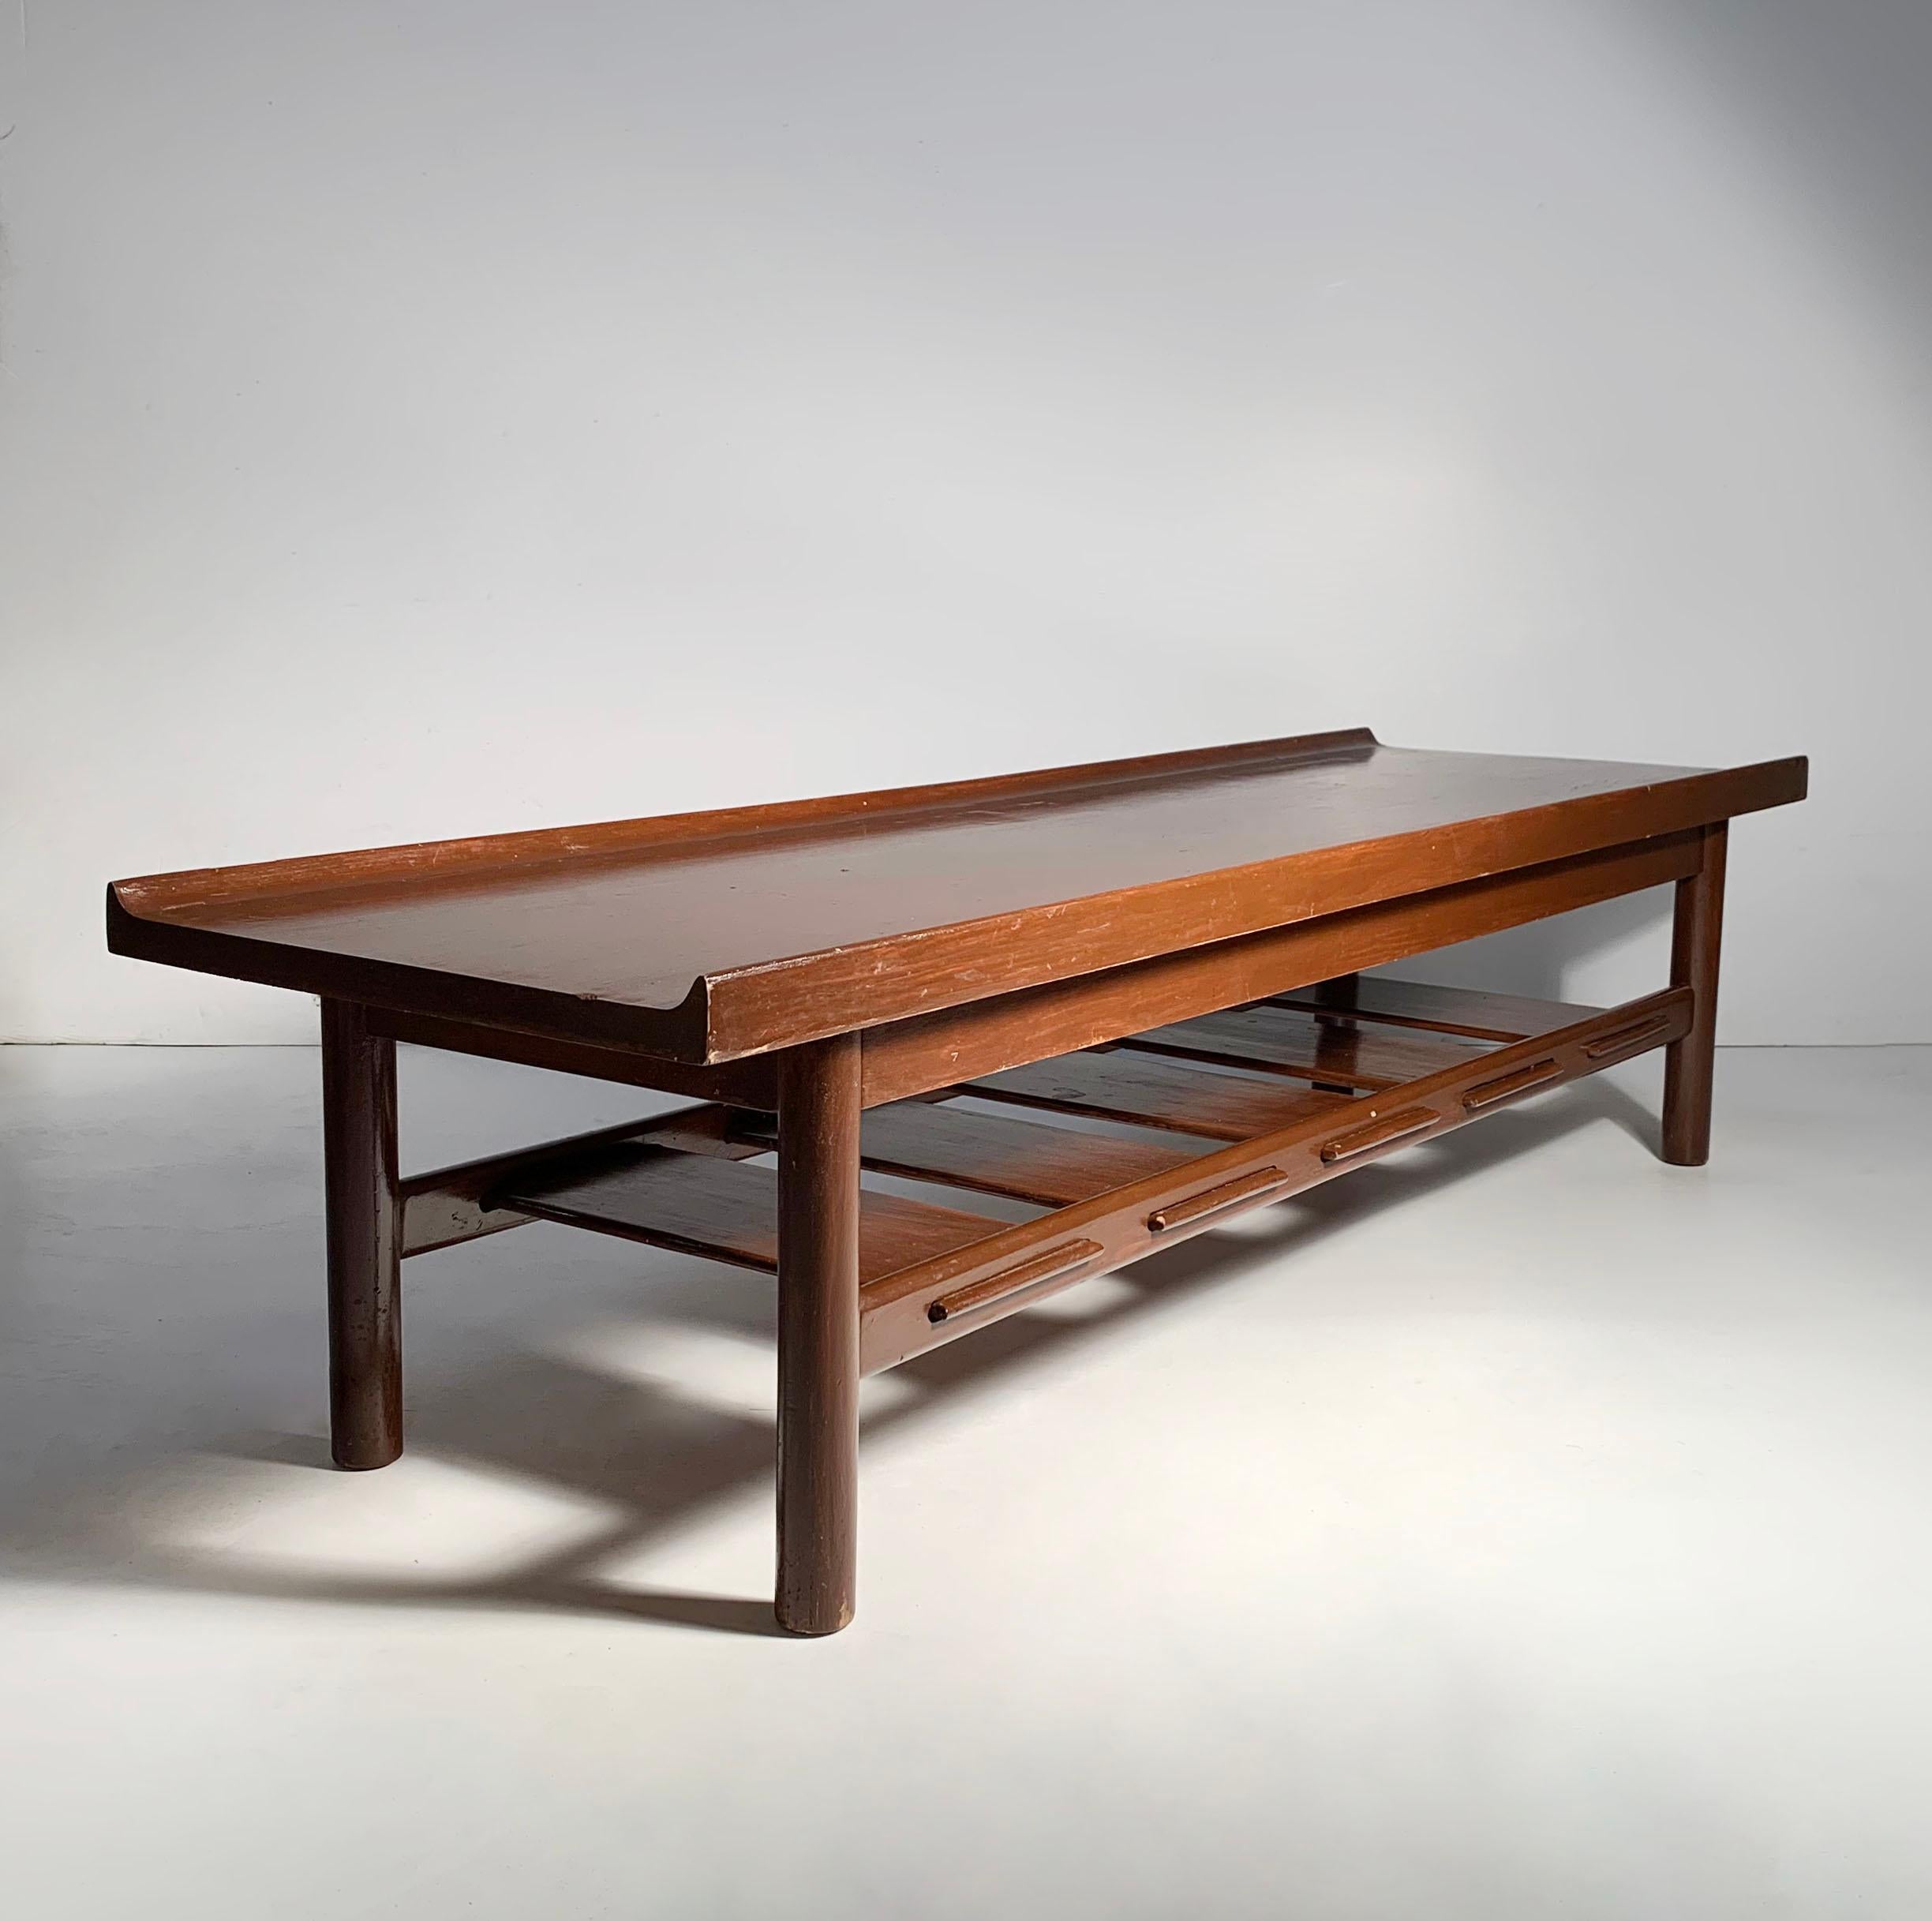 Lawrence Peabody Long Walnut Bench / Coffee Table For Richardson-Nemschoff In Good Condition For Sale In Chicago, IL